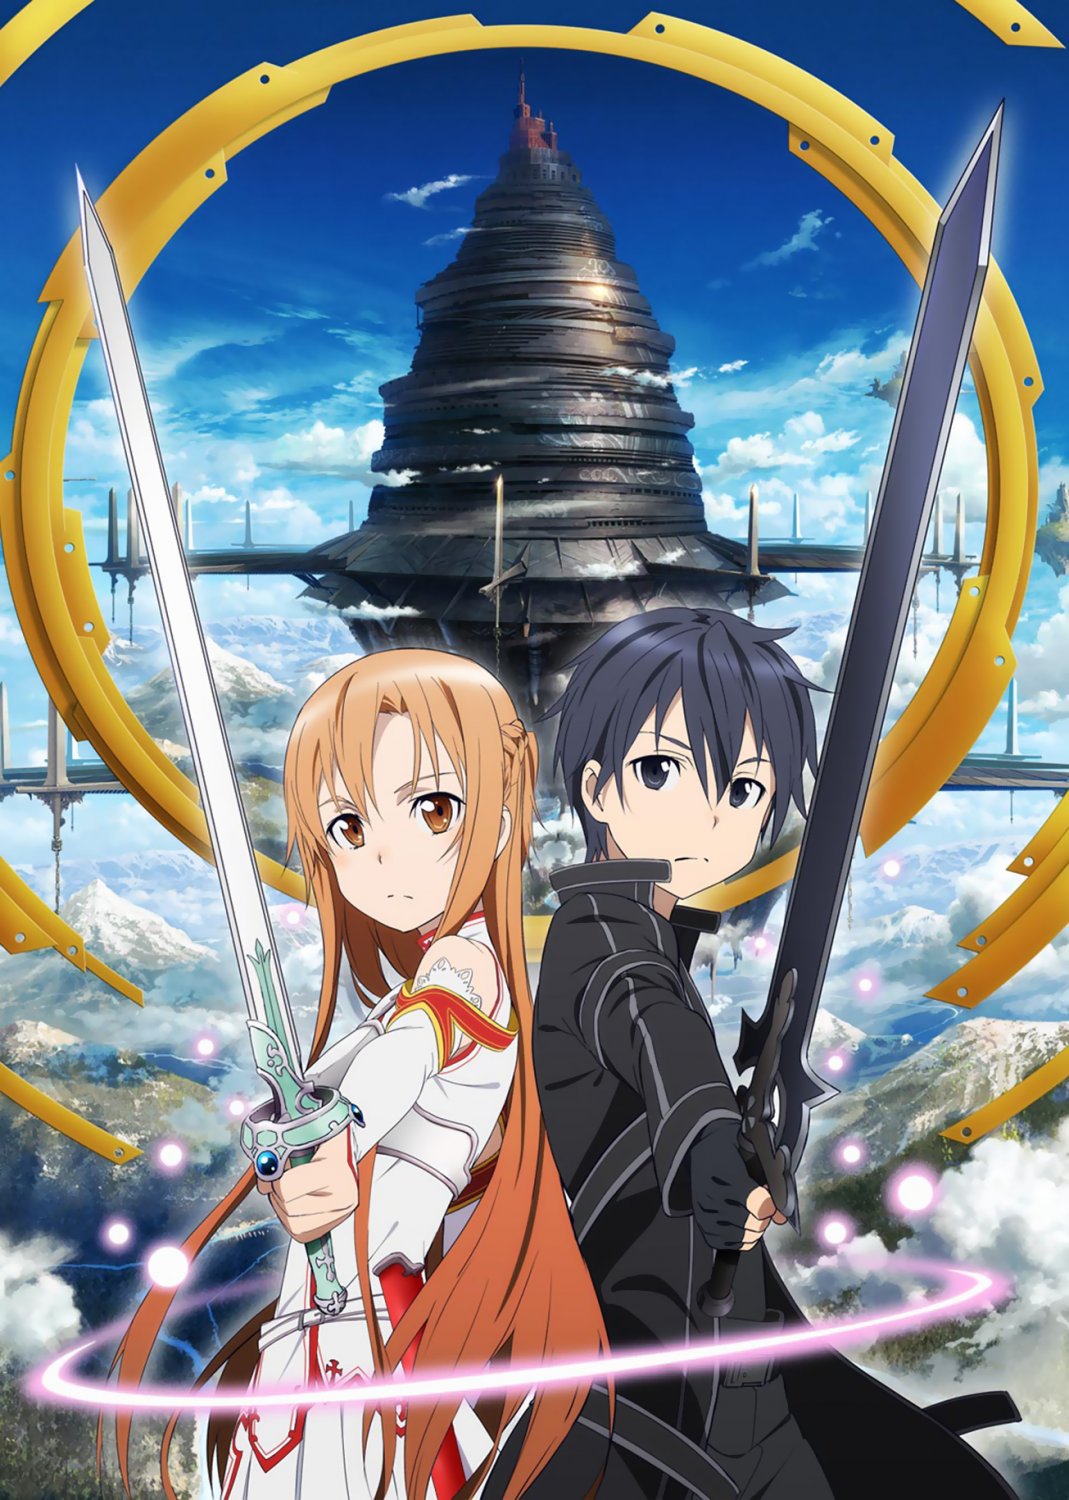 Sword Art Online Poster 13x19 inches